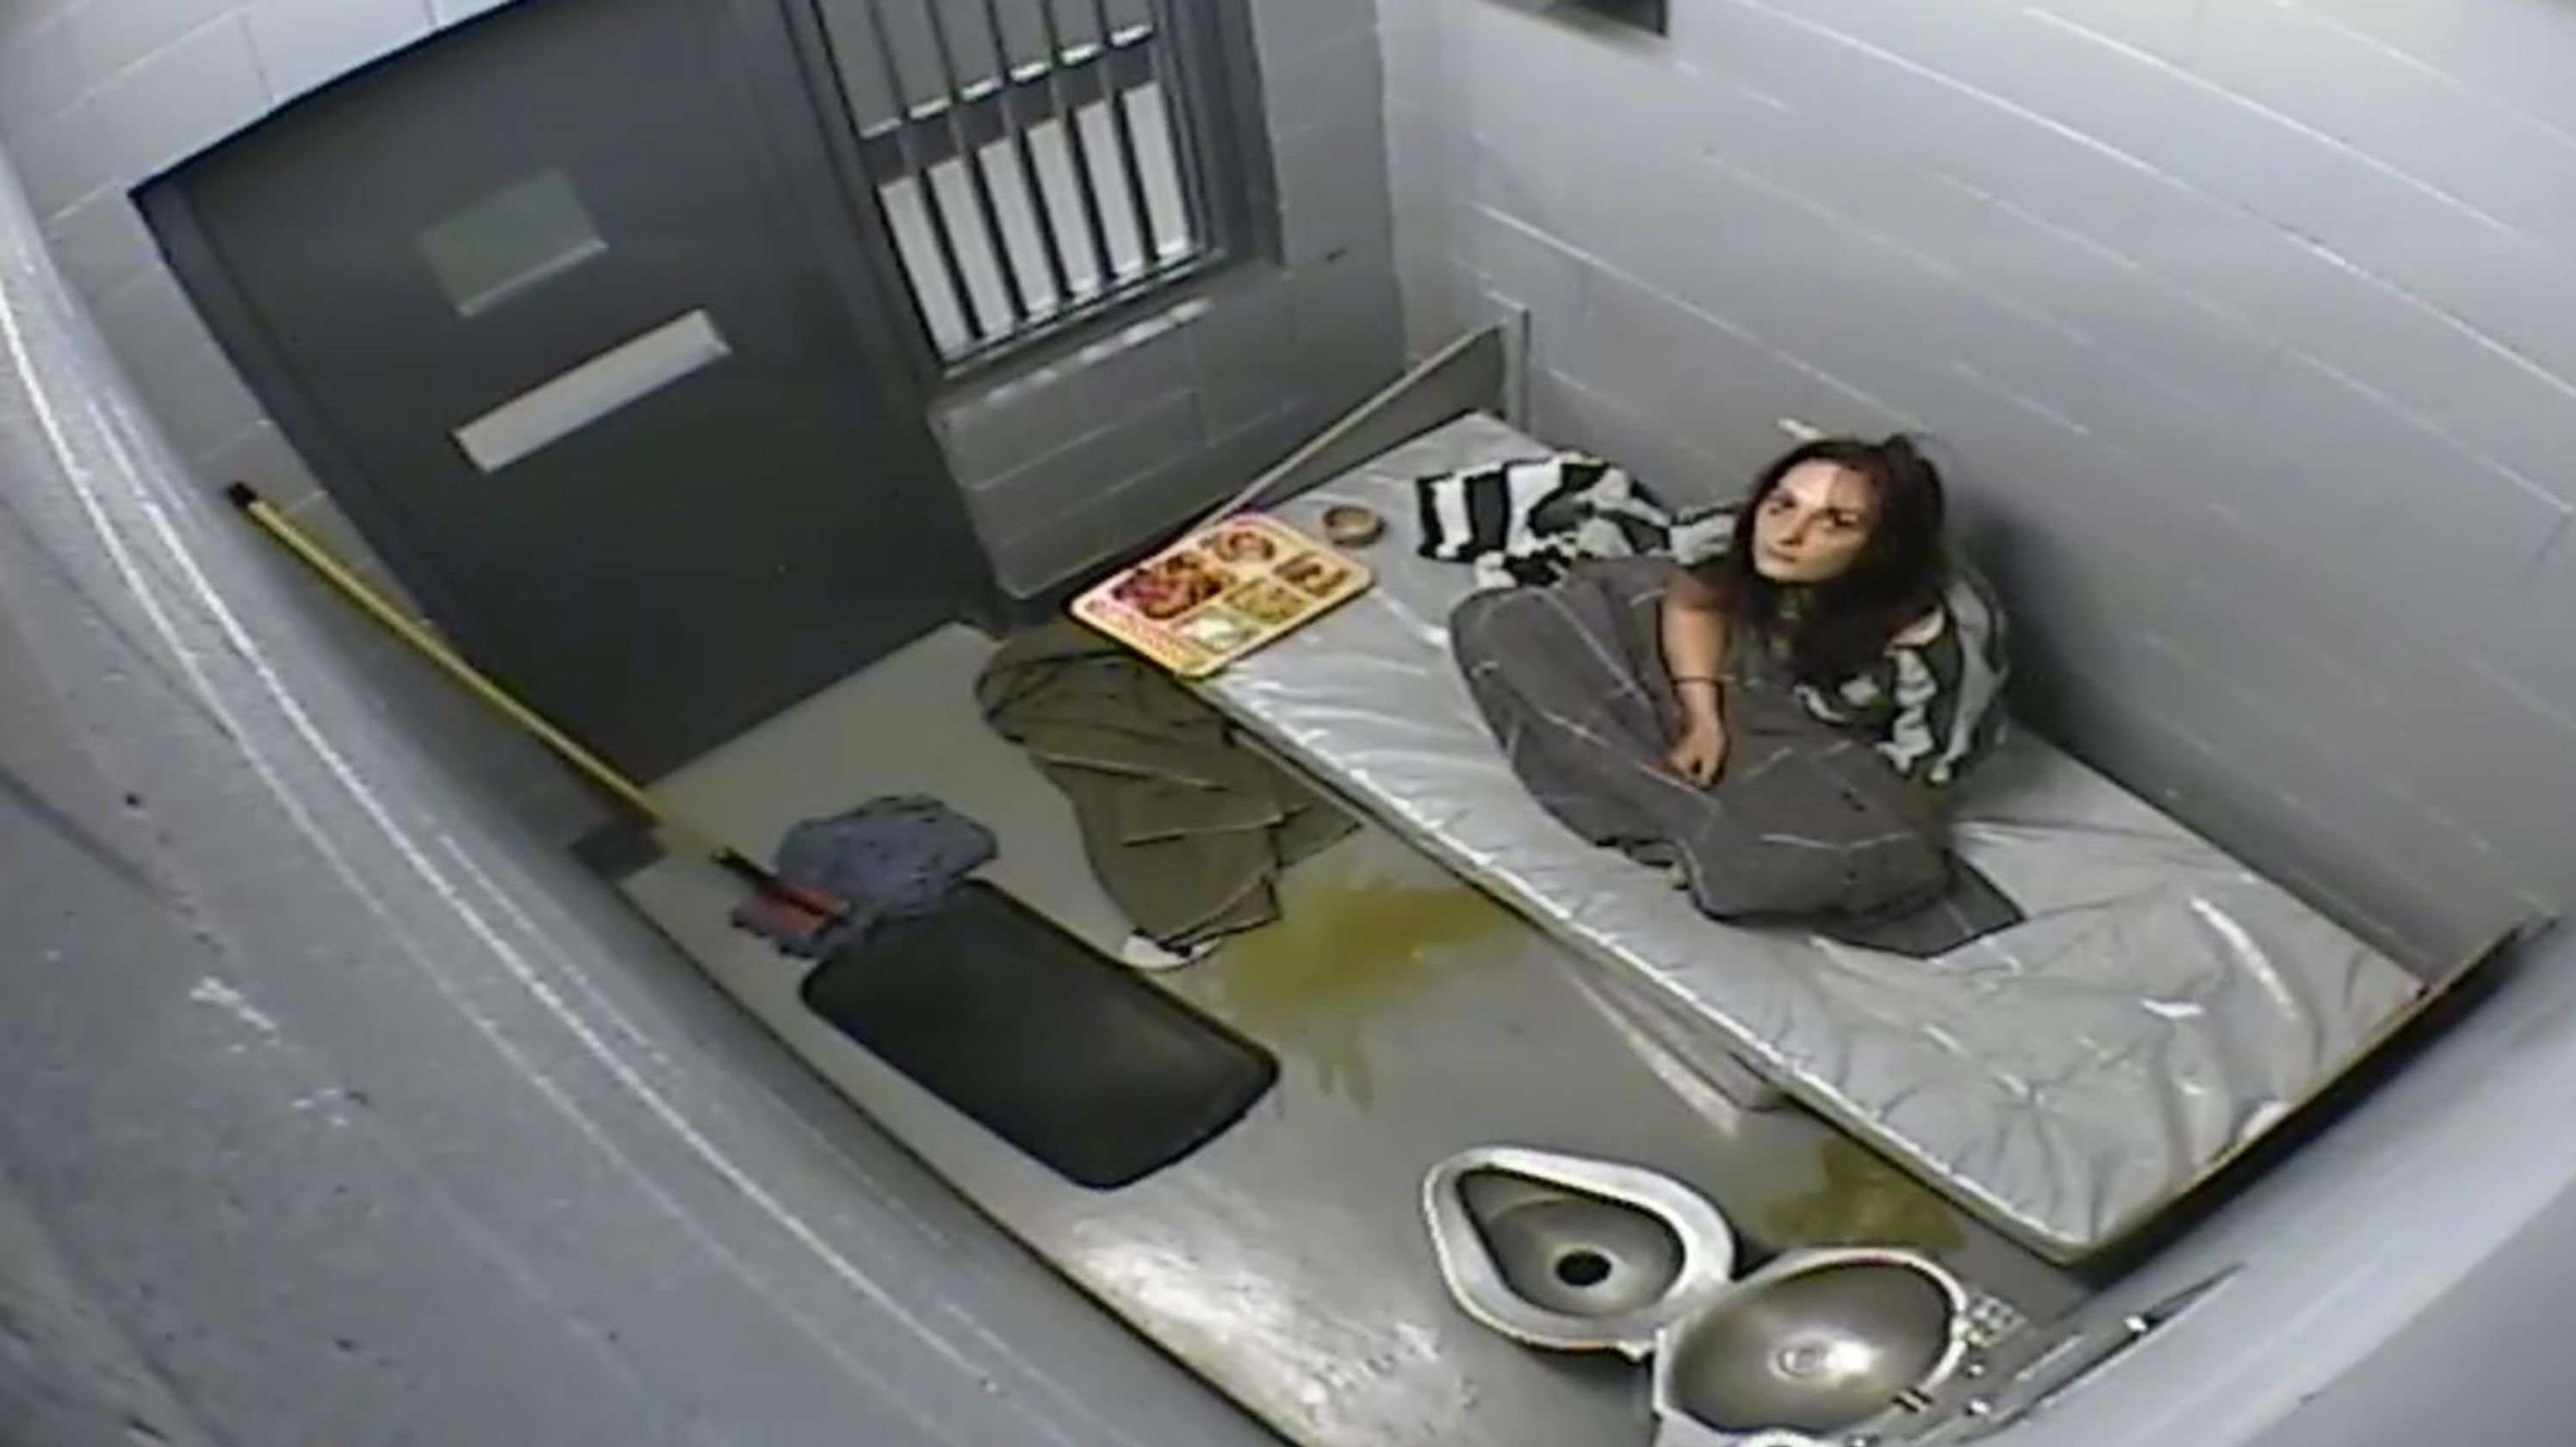 image for Denied medical care while detoxing, Texas woman died in a rural Nevada jail